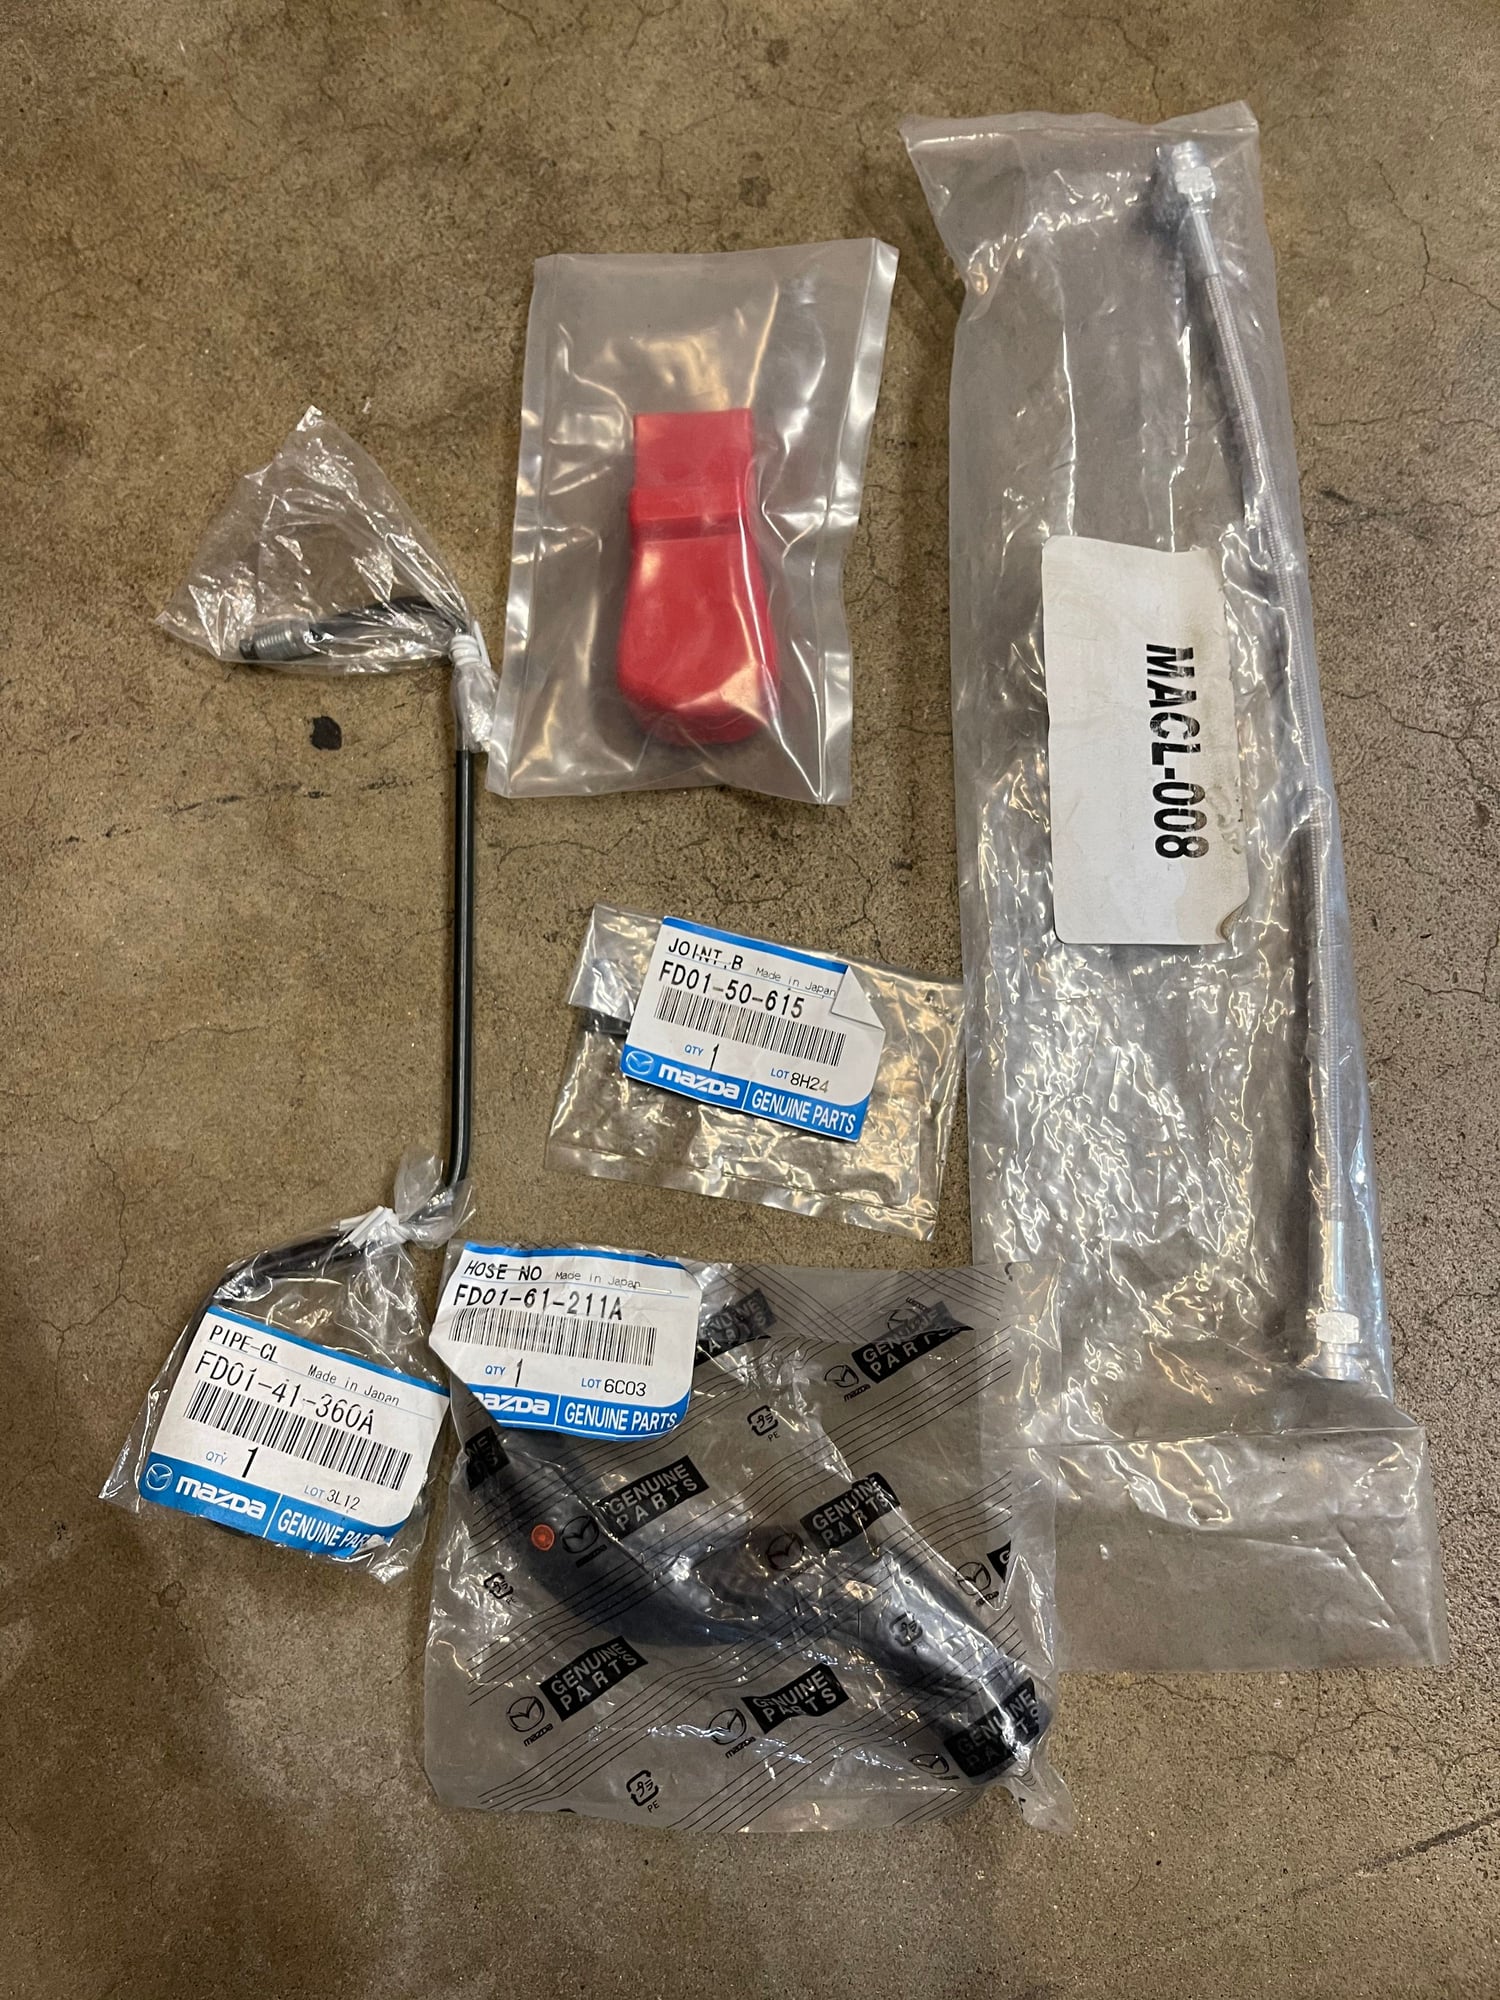 Miscellaneous - OEM parts new, stainless clutch line, bubble tech , bonez cat - Used - 1993 to 1995 Mazda RX-7 - Sacramento, CA 95662, United States